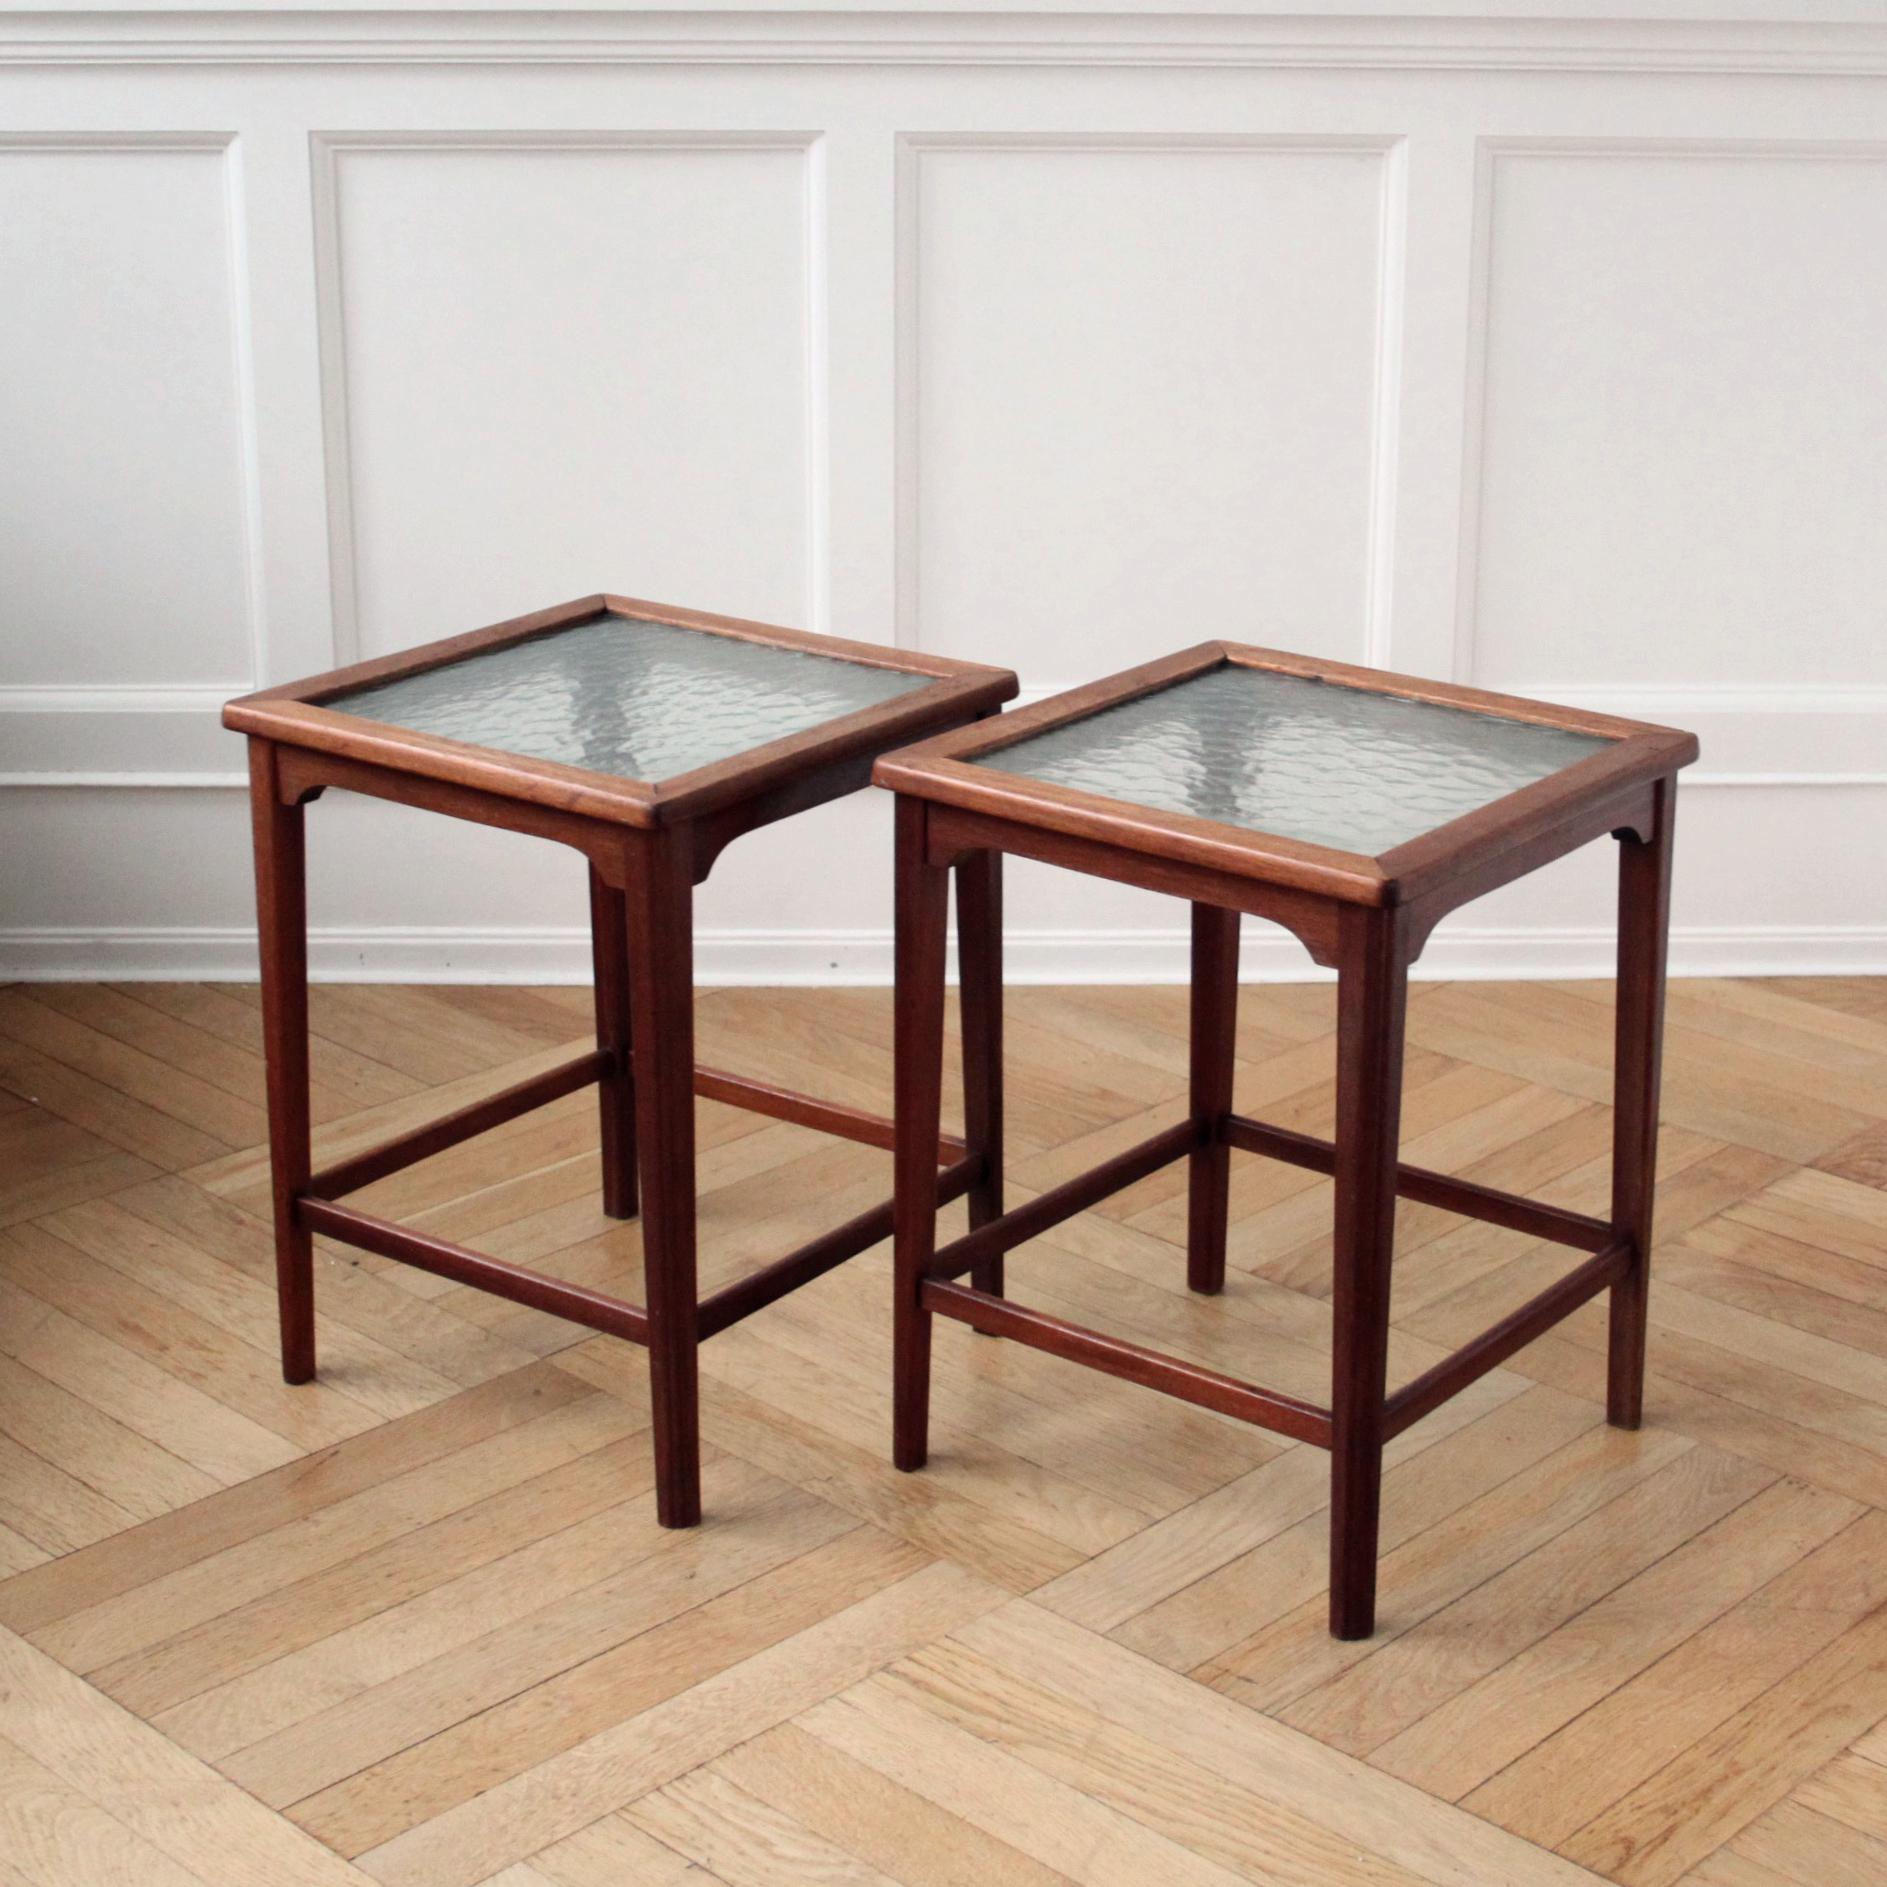 Danish Pair of Scandinavian Modern Side Tables, Mahogany and Decorative Glass, 1940s  For Sale